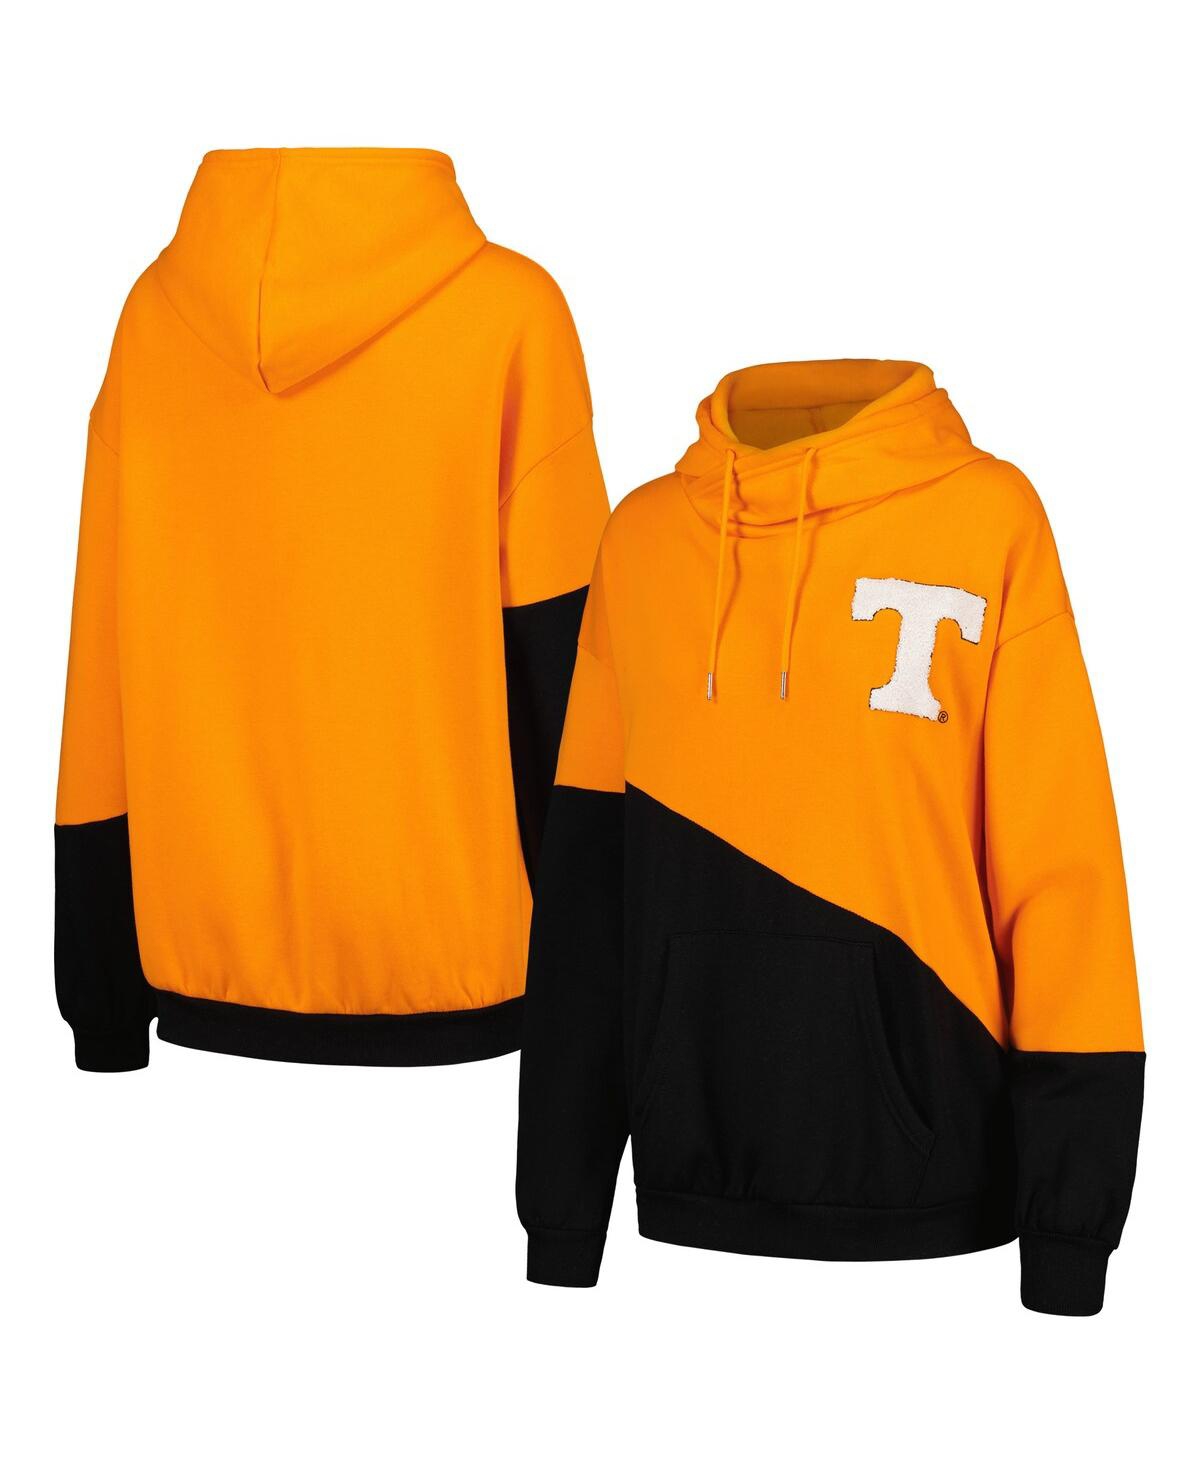 Women's Gameday Couture Tennessee Orange, Black Tennessee Volunteers Matchmaker Diagonal Cowl Pullover Hoodie - Tennessee Orange, Black